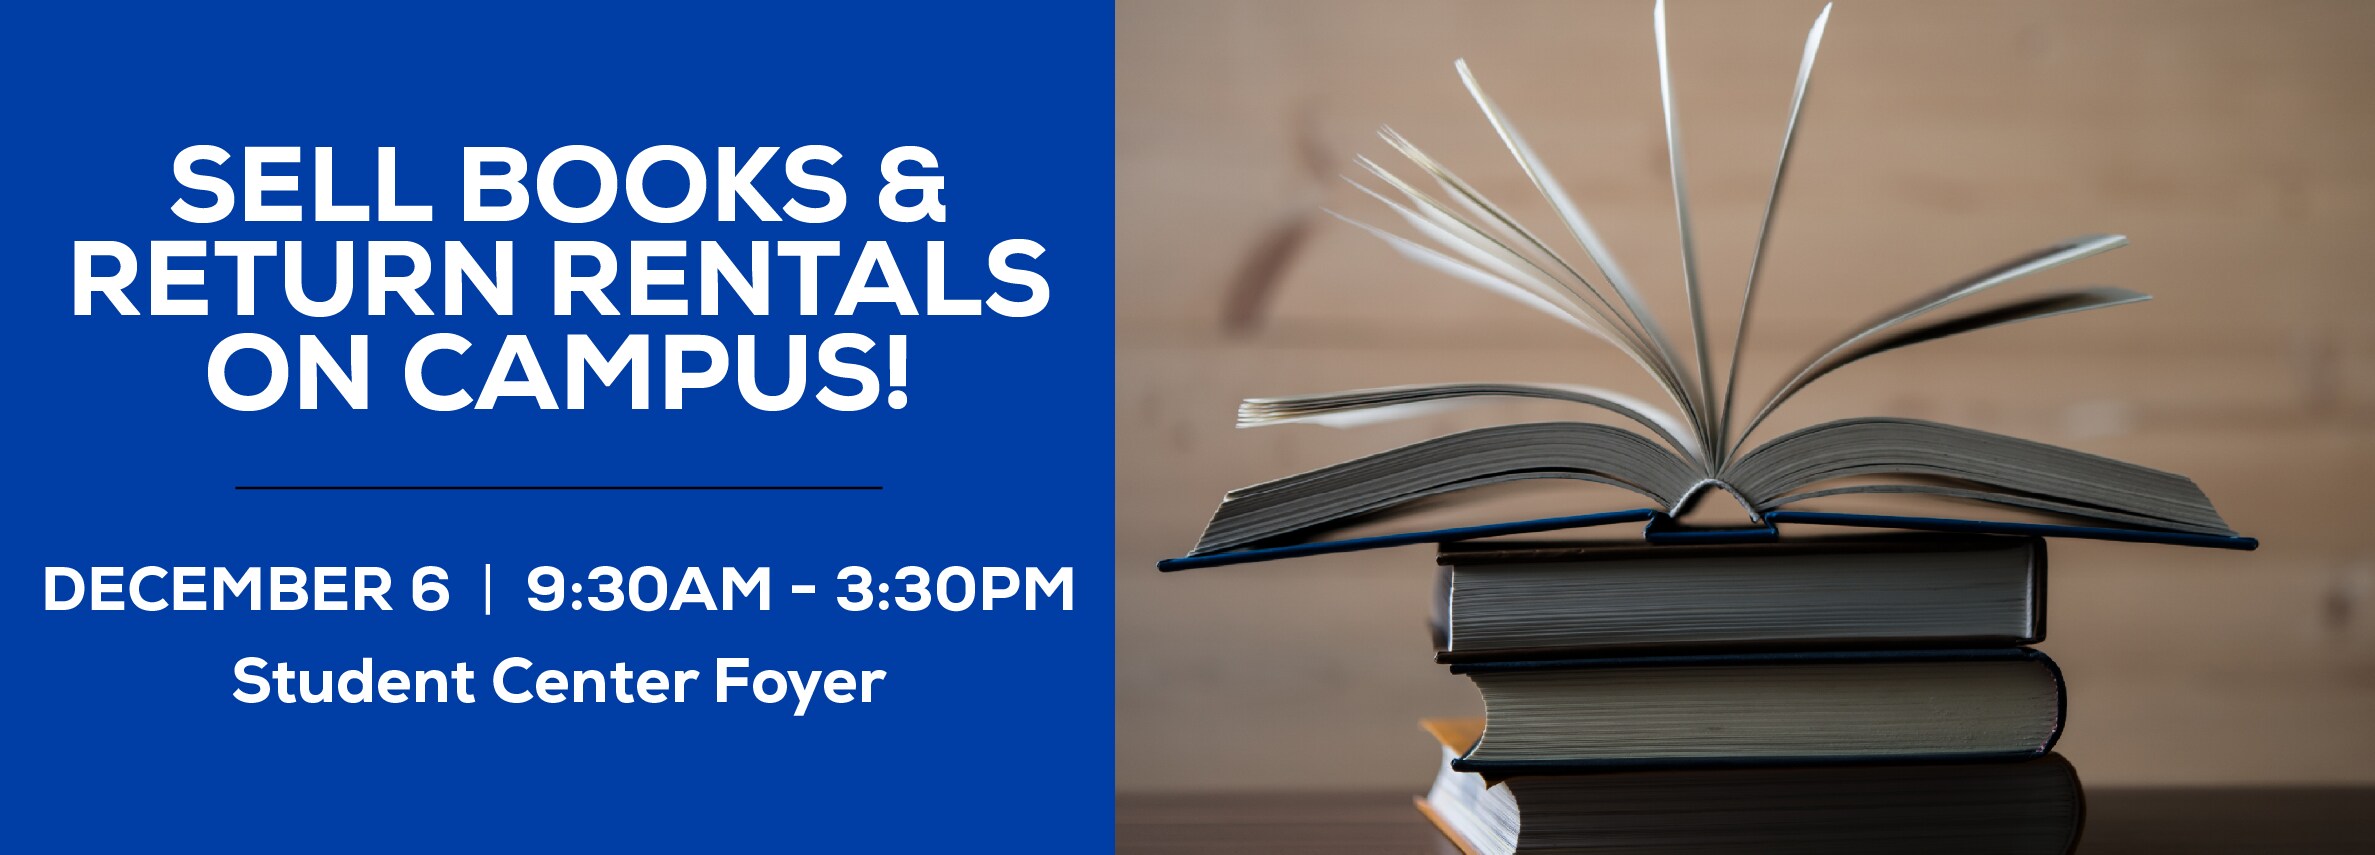 Sell books and return rentals on campus! December 6th from 9:30 am to 3:30 pm at the Student Center Foyer. Can't make it? Sell and return online. Sell and return now.